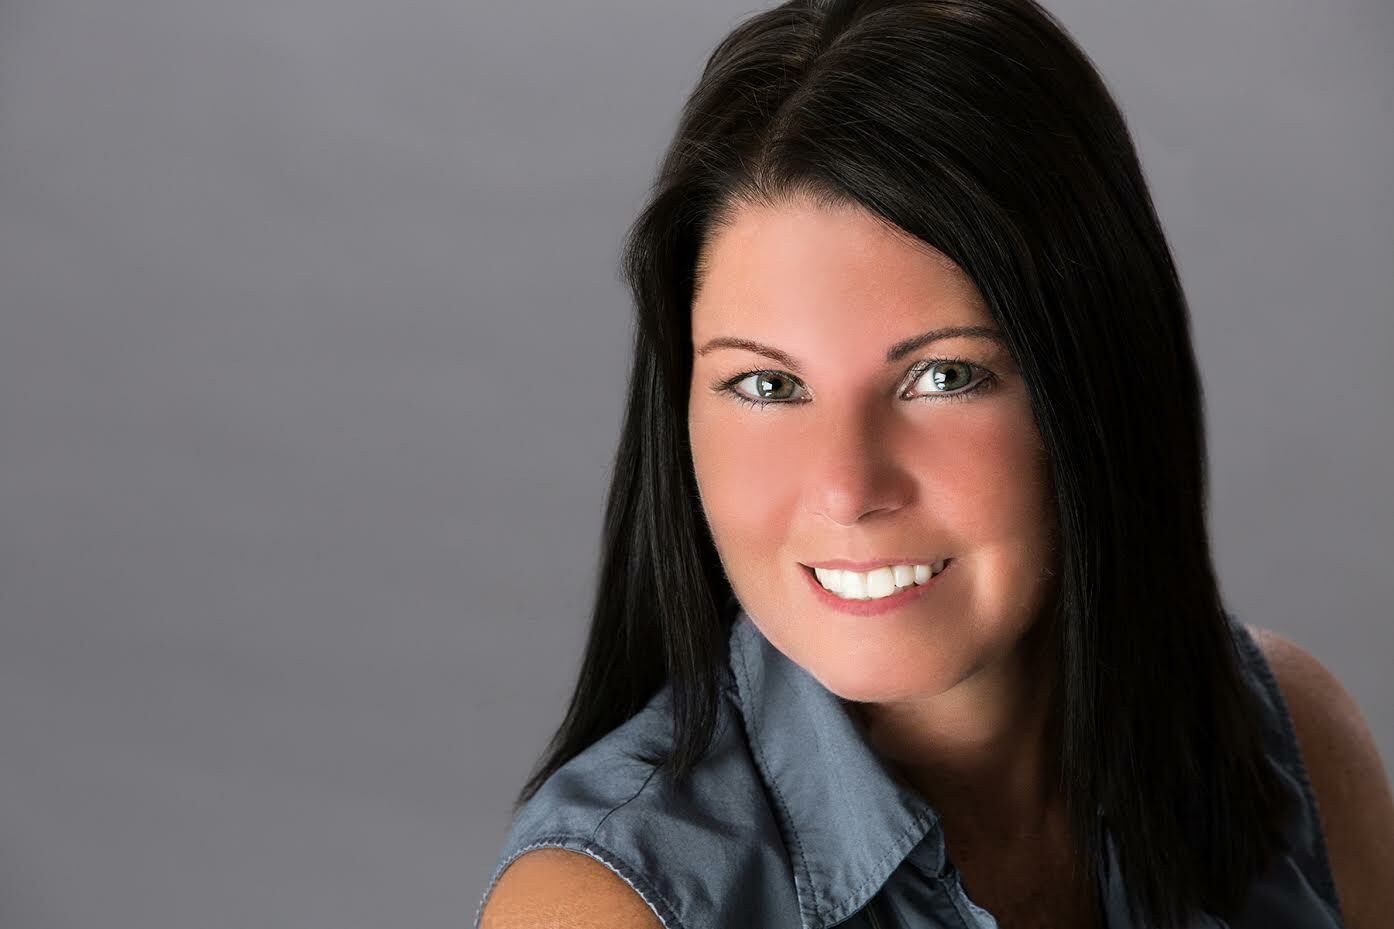 Victoria Baker, Real Estate Salesperson in Midland, Signature Realty